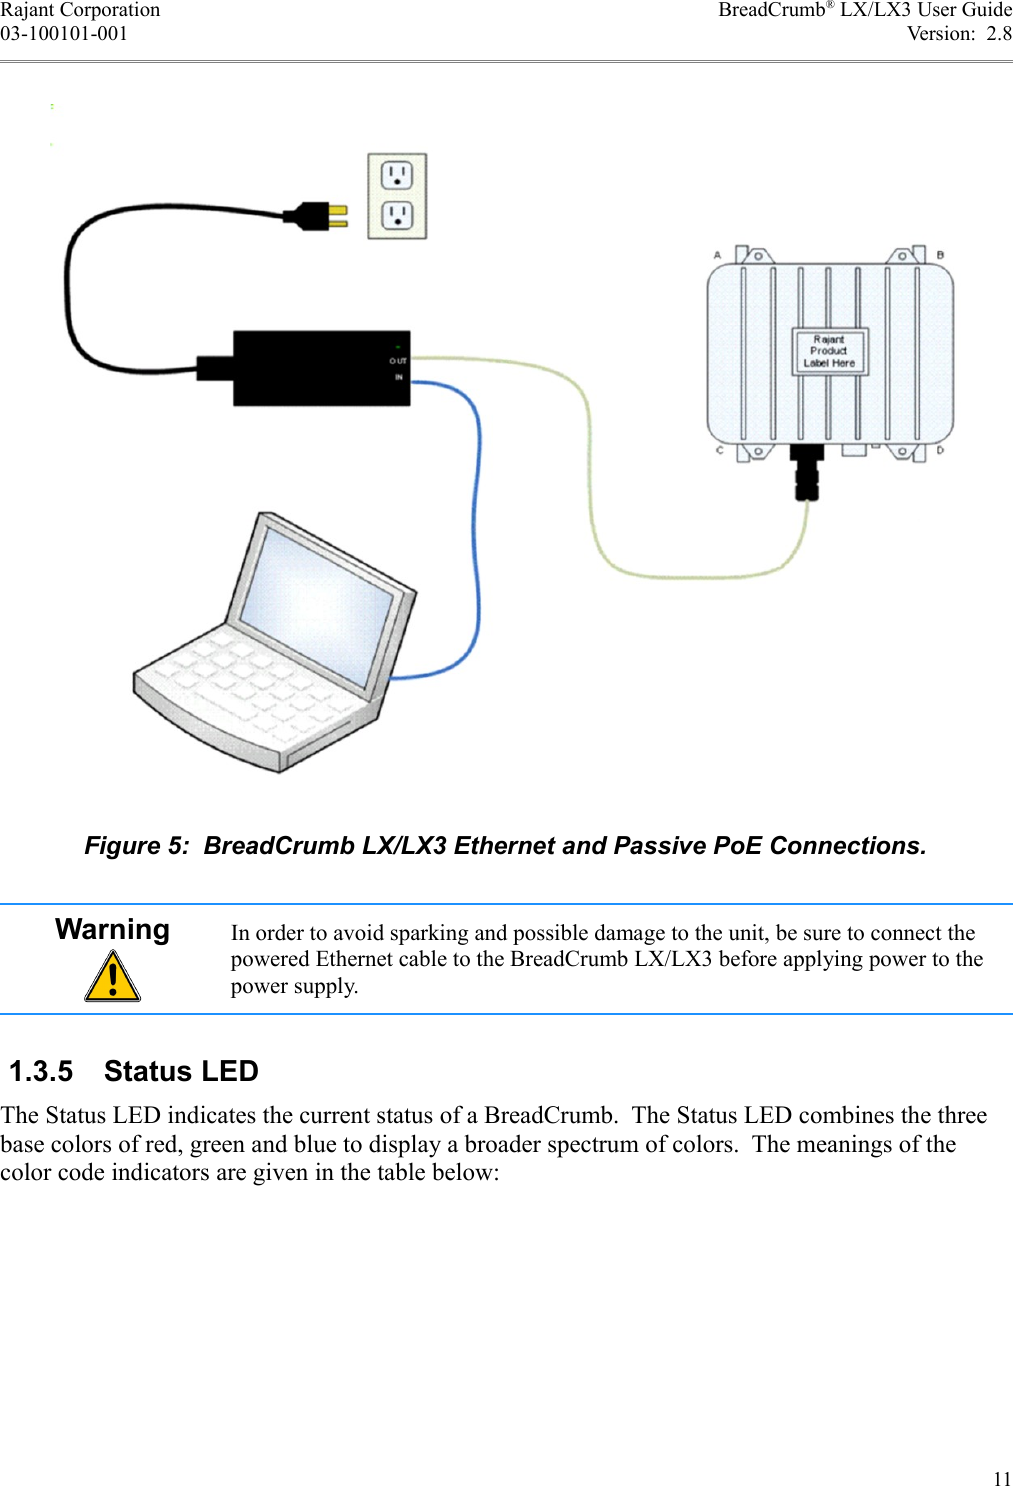 Rajant Corporation BreadCrumb® LX/LX3 User Guide03-100101-001 Version:  2.8Warning In order to avoid sparking and possible damage to the unit, be sure to connect the powered Ethernet cable to the BreadCrumb LX/LX3 before applying power to the power supply. 1.3.5  Status LEDThe Status LED indicates the current status of a BreadCrumb.  The Status LED combines the three base colors of red, green and blue to display a broader spectrum of colors.  The meanings of the color code indicators are given in the table below:11Figure 5:  BreadCrumb LX/LX3 Ethernet and Passive PoE Connections.